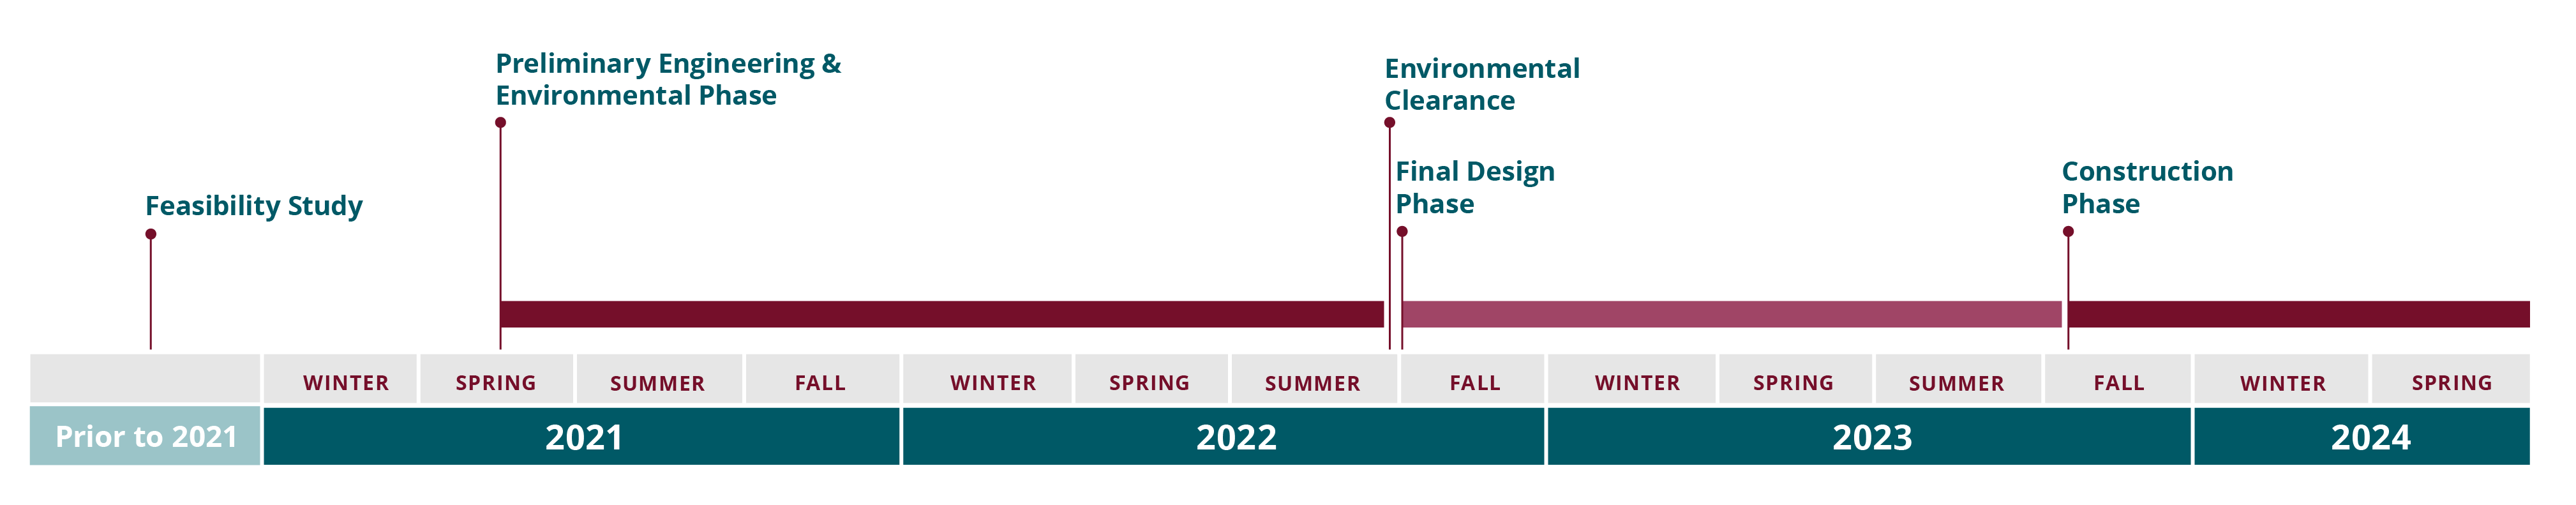 Prior to 2021 was feasibility study, Spring 2021 environmental review and engineering phase begins and continues to end of Fall 2022.